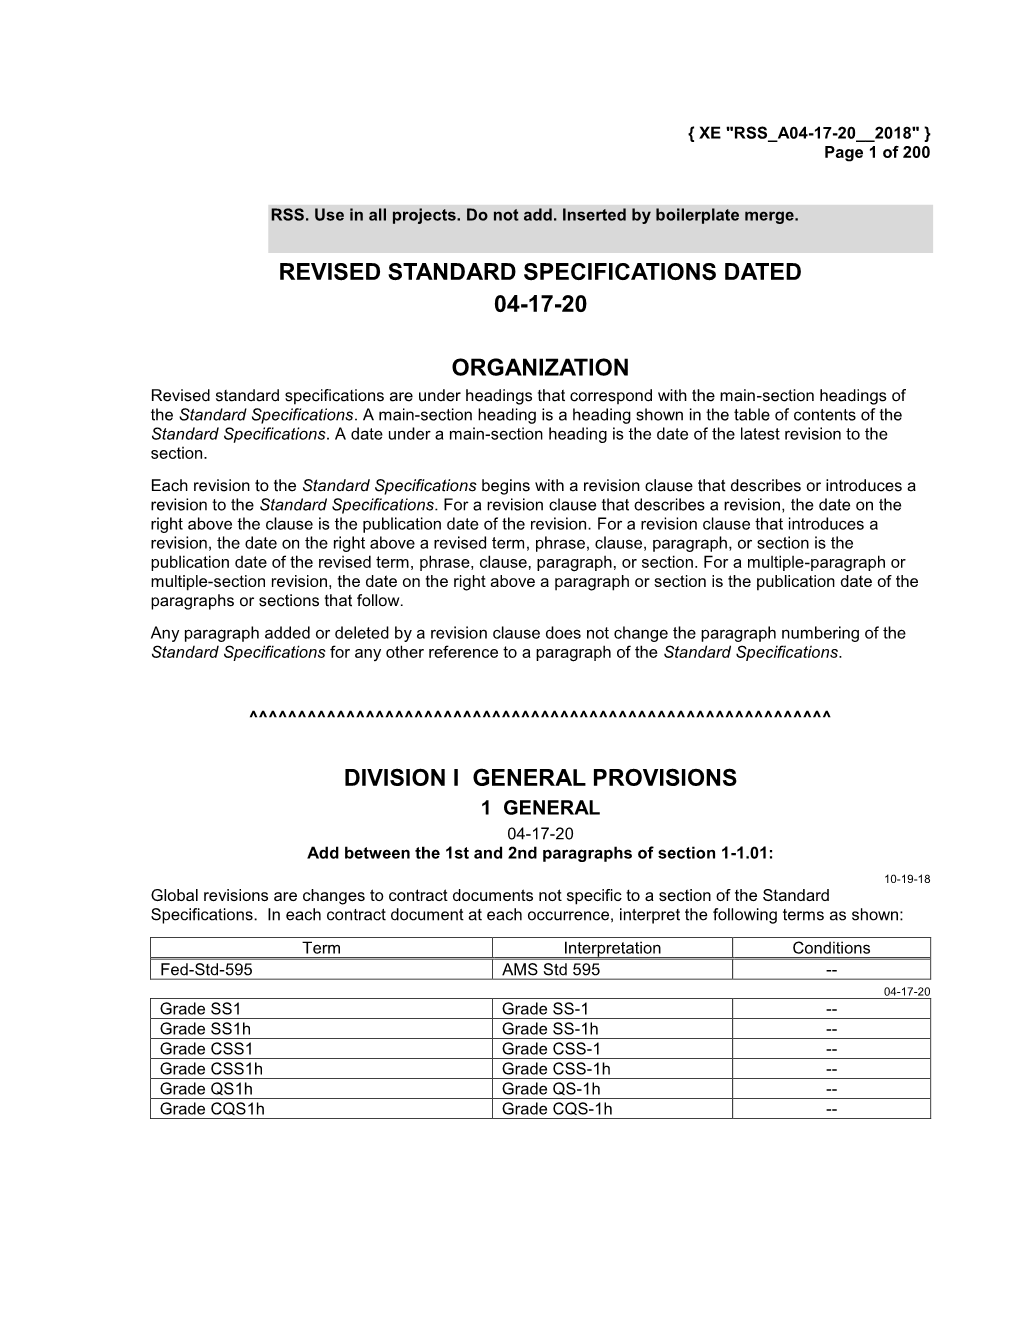 Revised Standard Specifications Dated 04-17-20 Organization